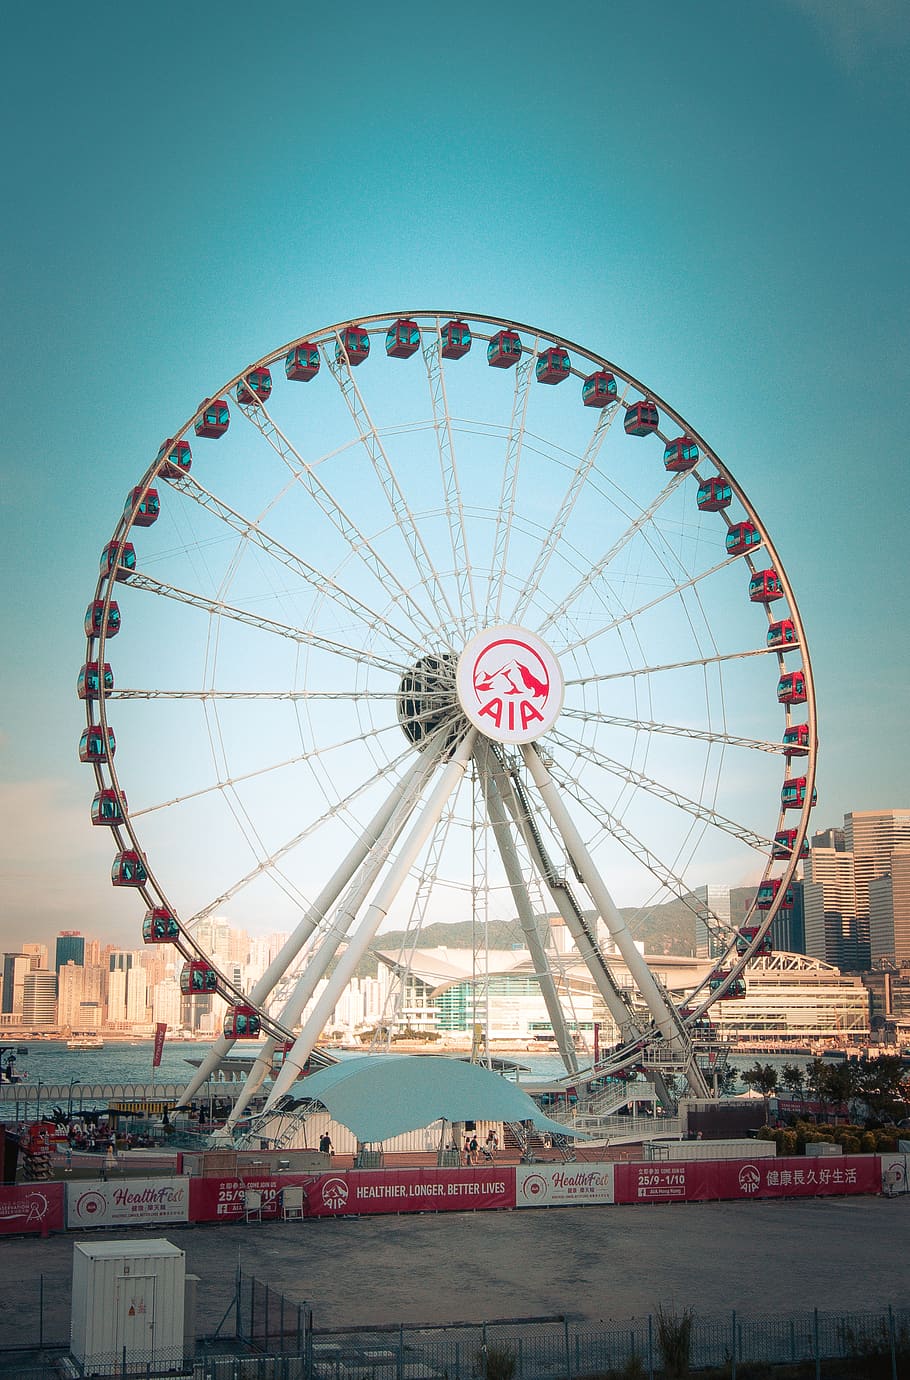 white Aia ferris wheel near body of water and building during daytime, HD wallpaper